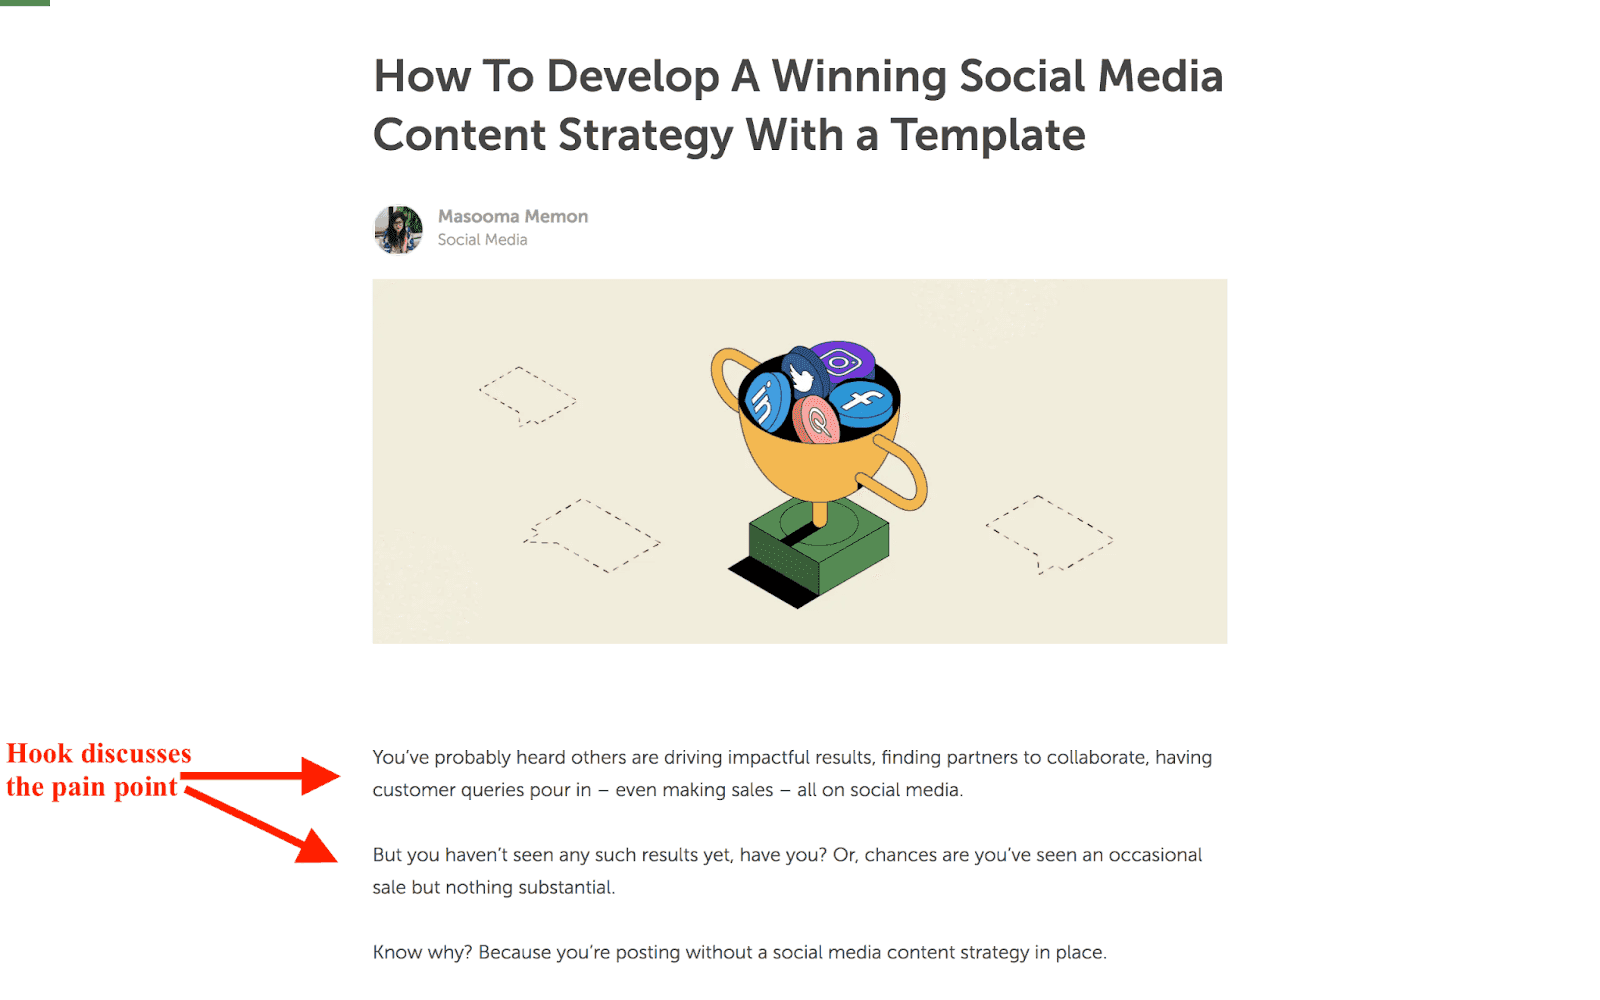 "How to develop a winning social media content strategy with a template" blog title example